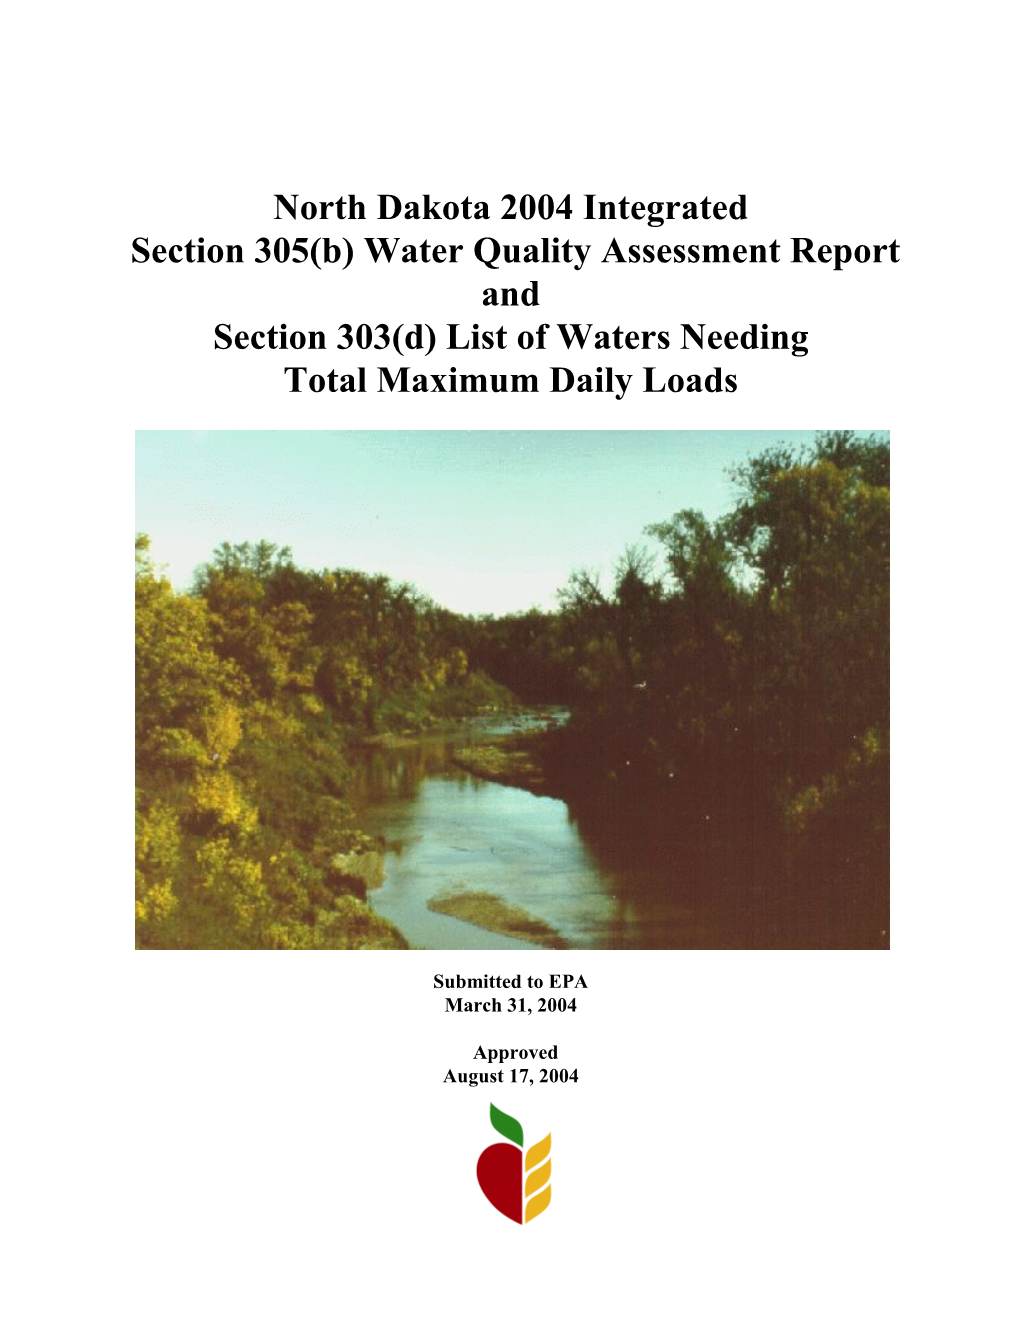 North Dakota 2004 Integrated Section 305(B) Water Quality Assessment Report and Section 303(D) List of Waters Needing Total Maximum Daily Loads